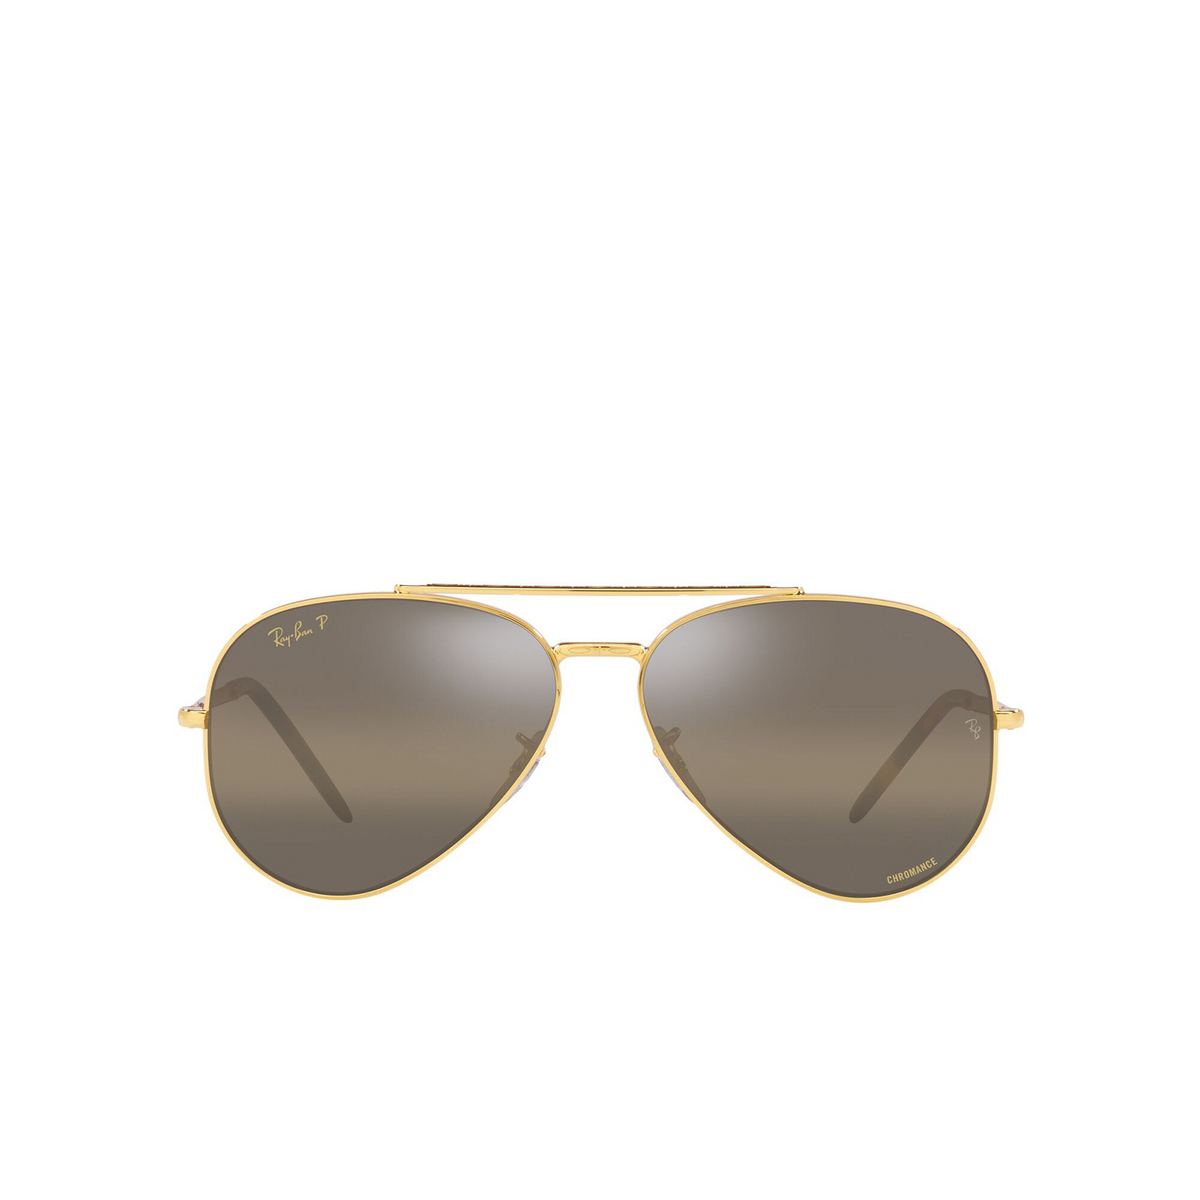 Ray-Ban NEW AVIATOR Sunglasses 9196G5 Legend Gold - front view